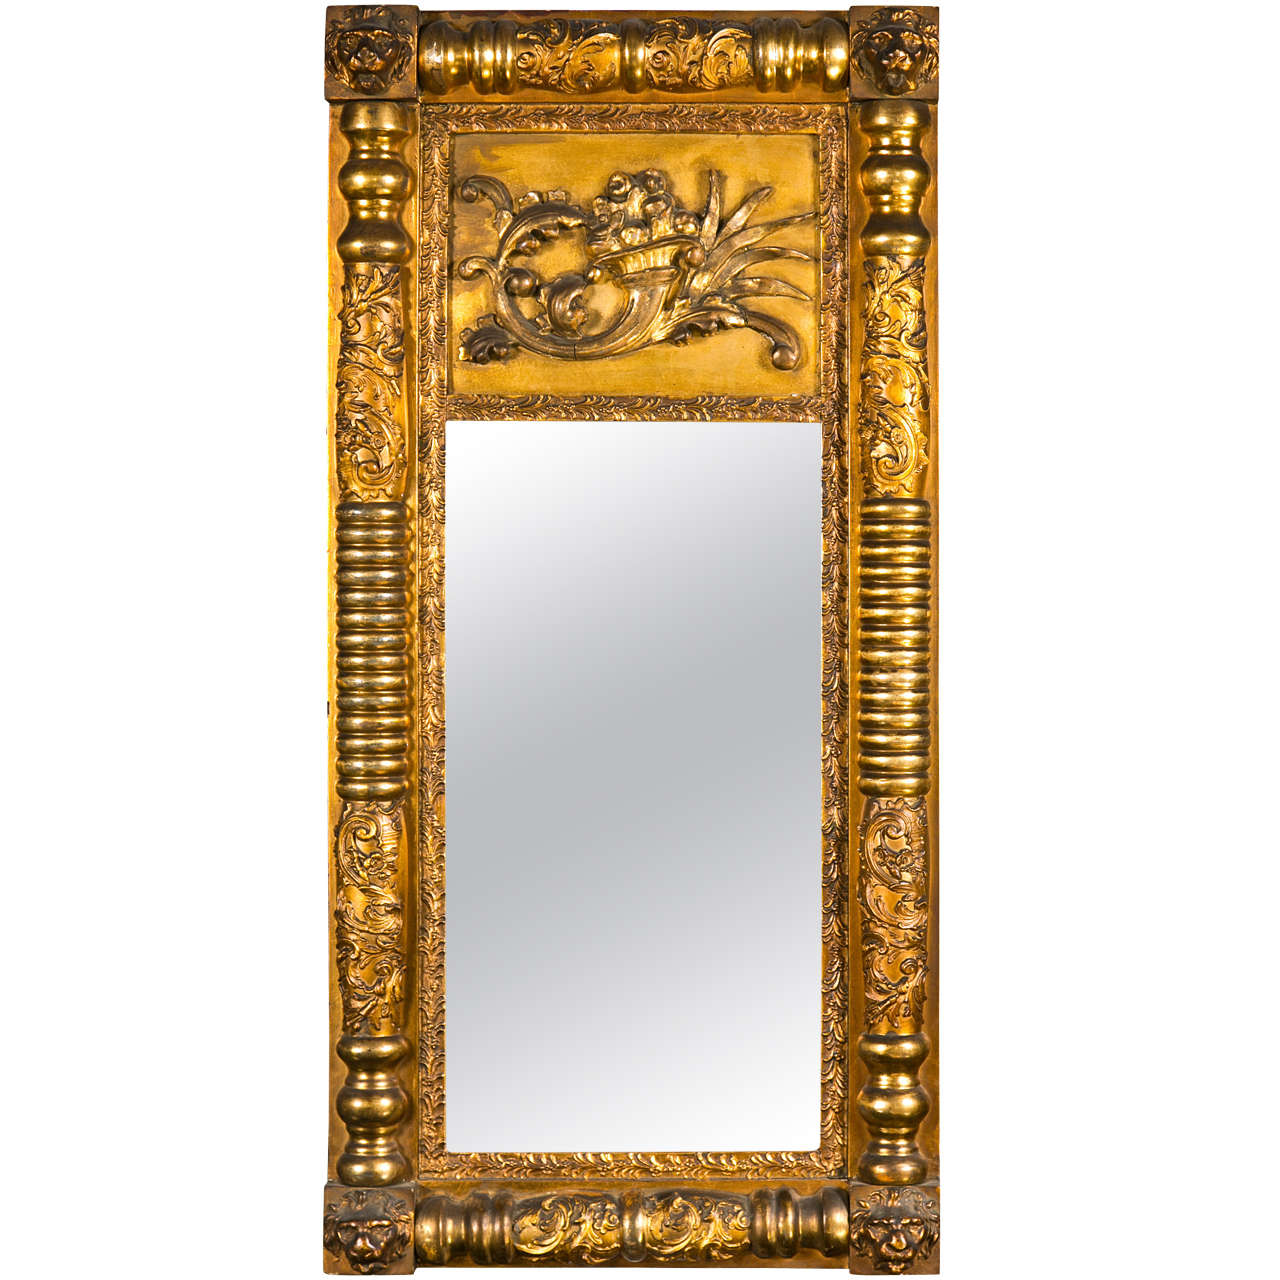 French Empire Style Giltwood Mirror Elaborately Carved Frame Circa 19th Century